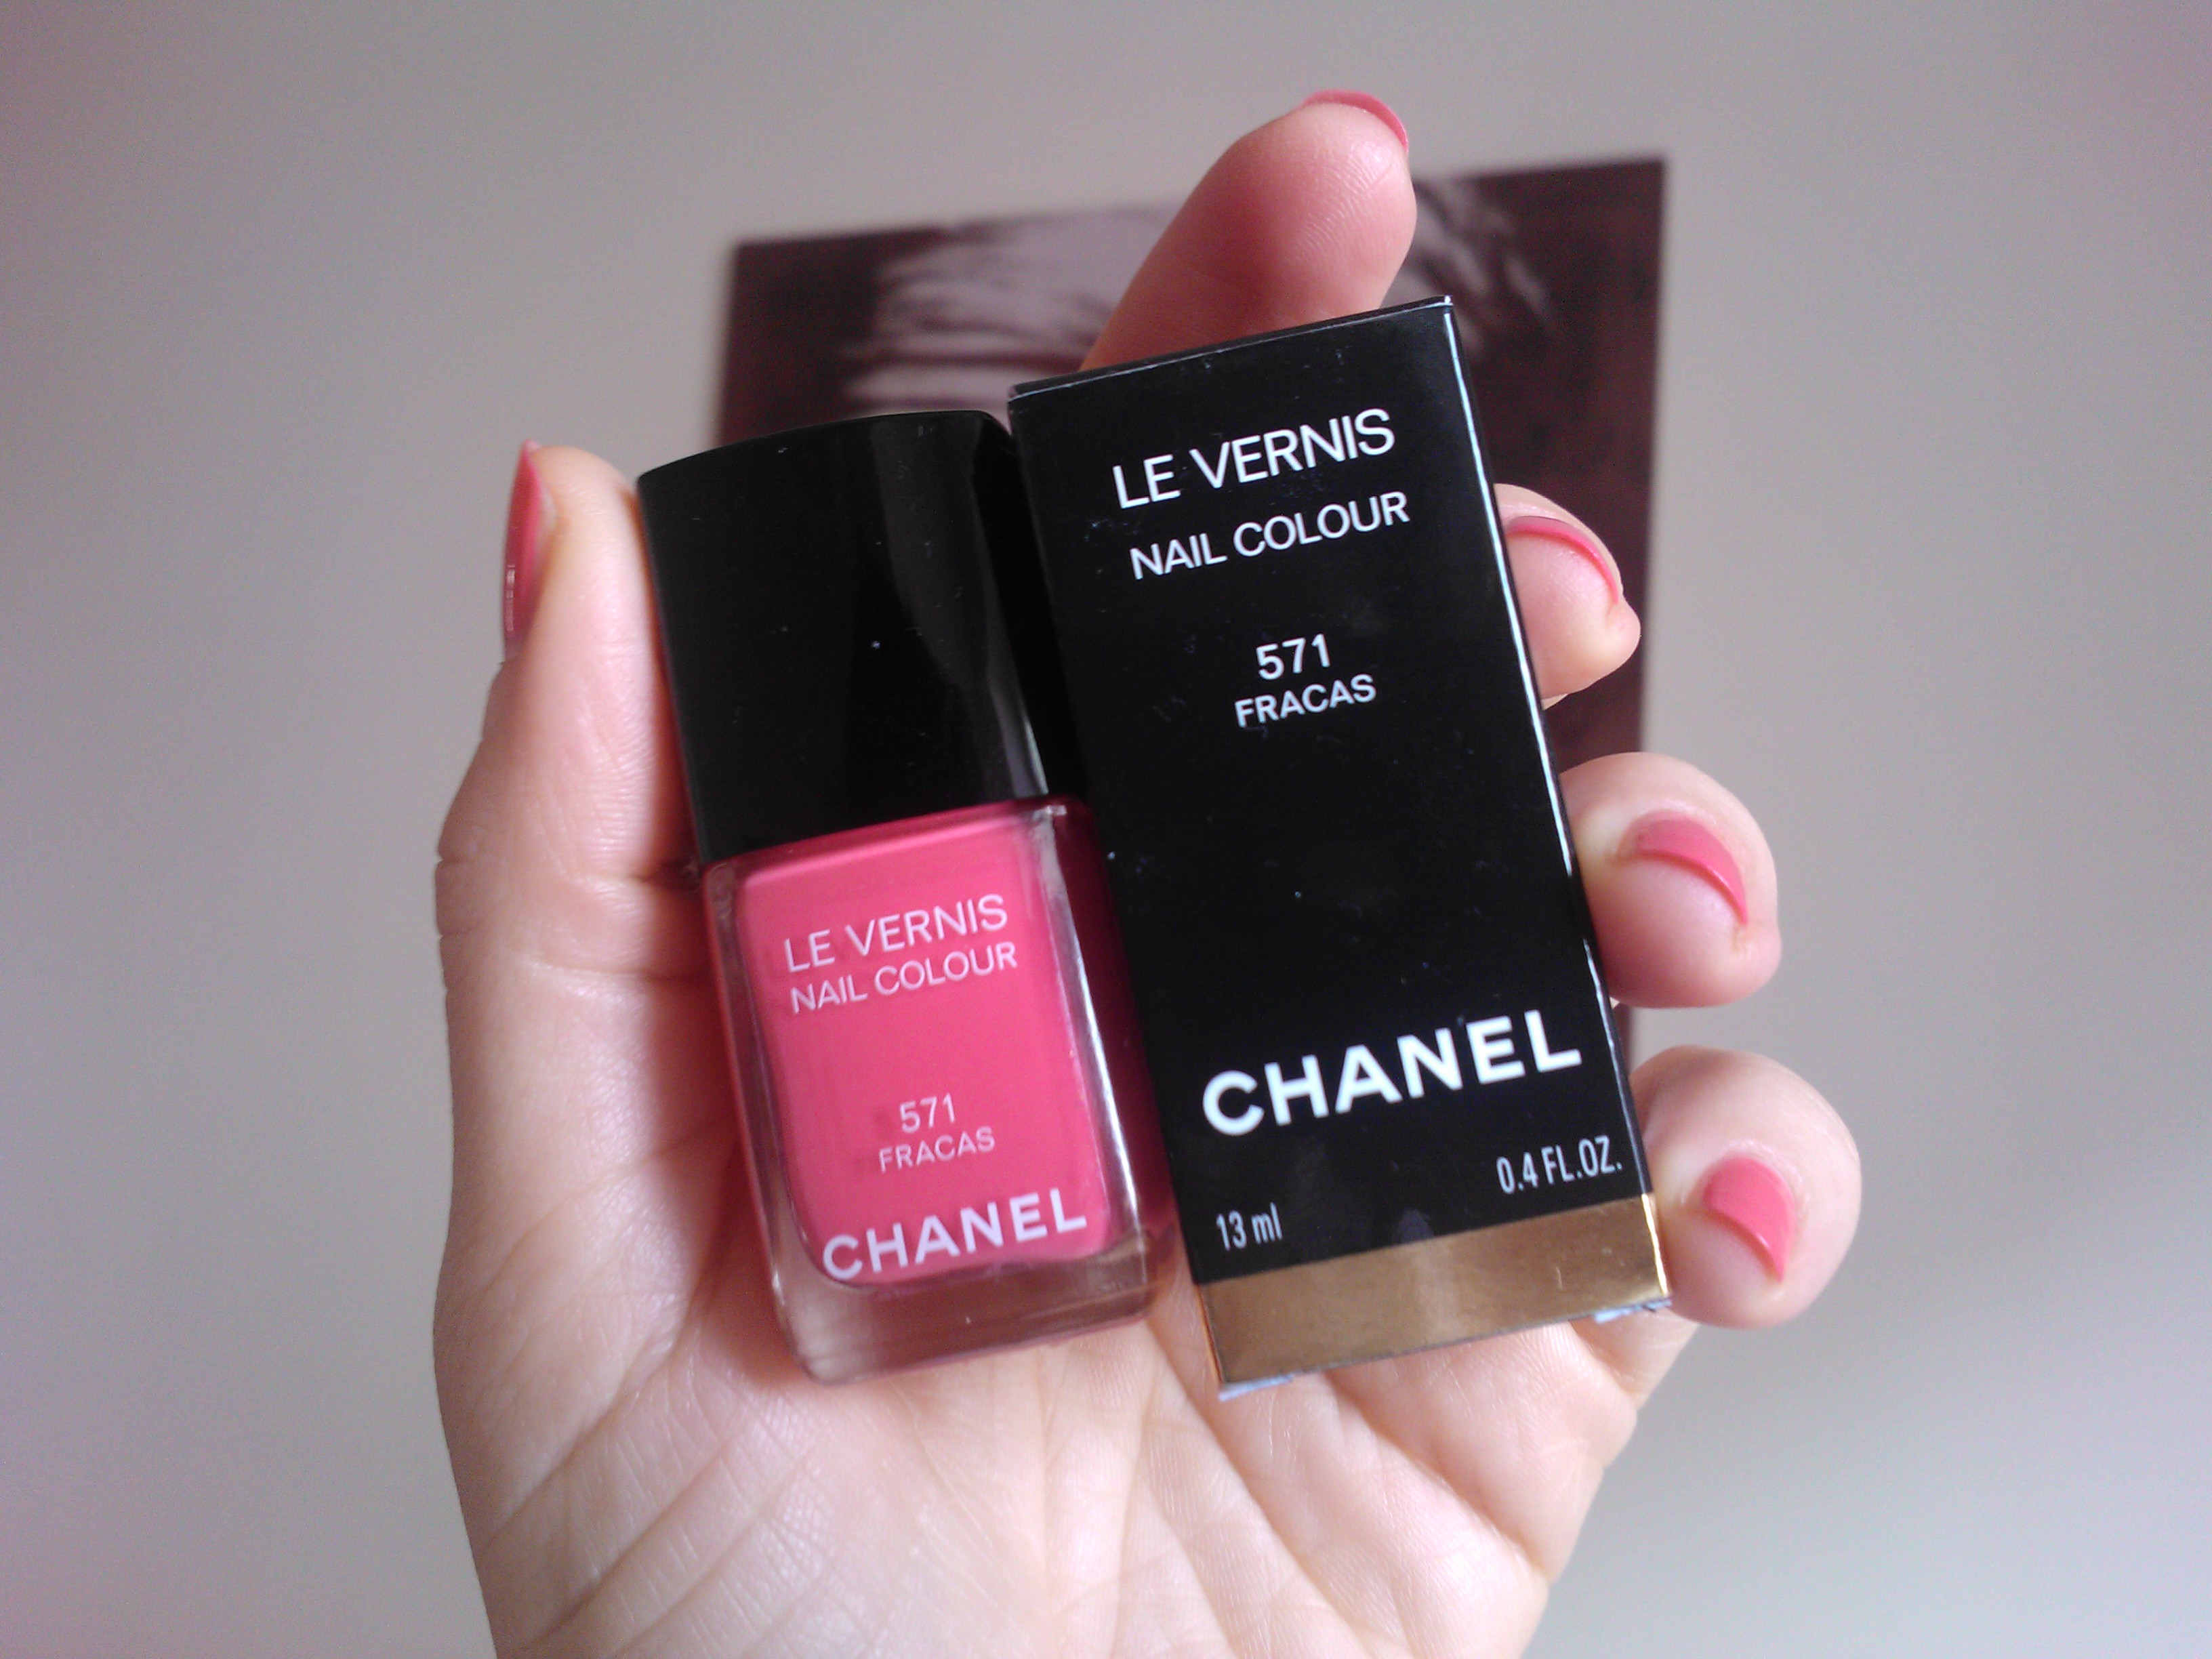 Chanel in #571 Fracas + Comparisons